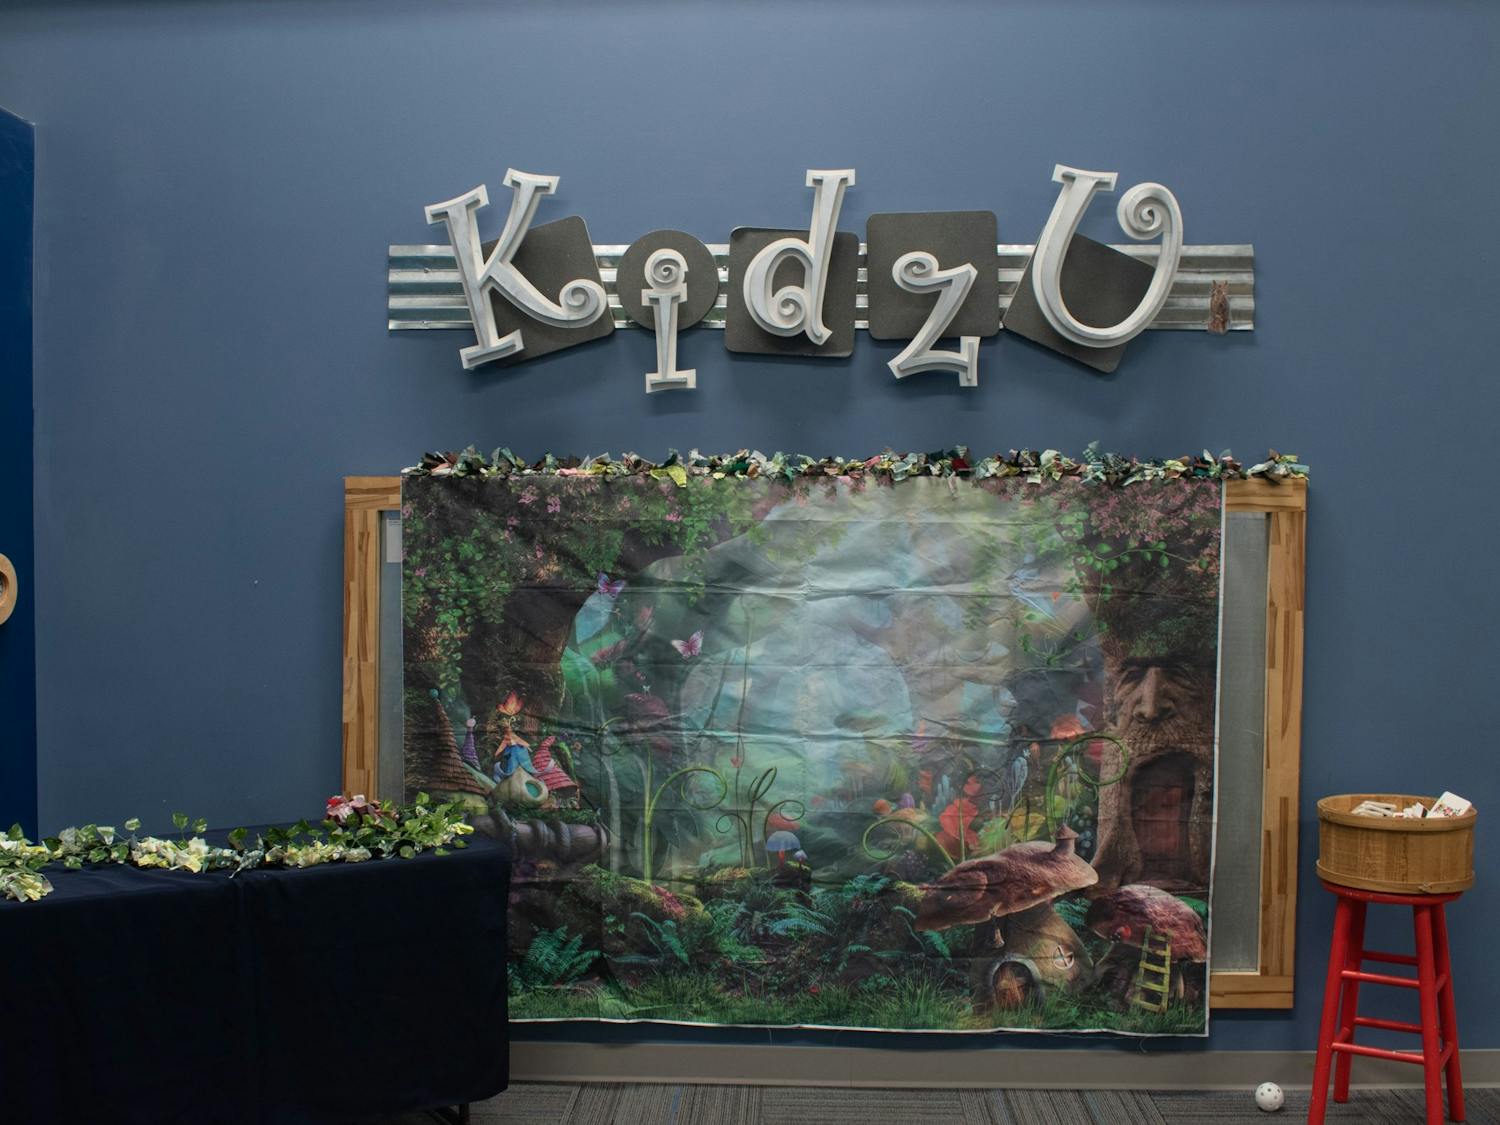 Kidzu Children’s Museum's new birthday party theme setup is located in Chapel Hill on Wednesday, March 1, 2023. Kidzu will be celebrating their 17th Birthday on Sunday, March 5, where they will be showcasing the new themes for their birthday parties.